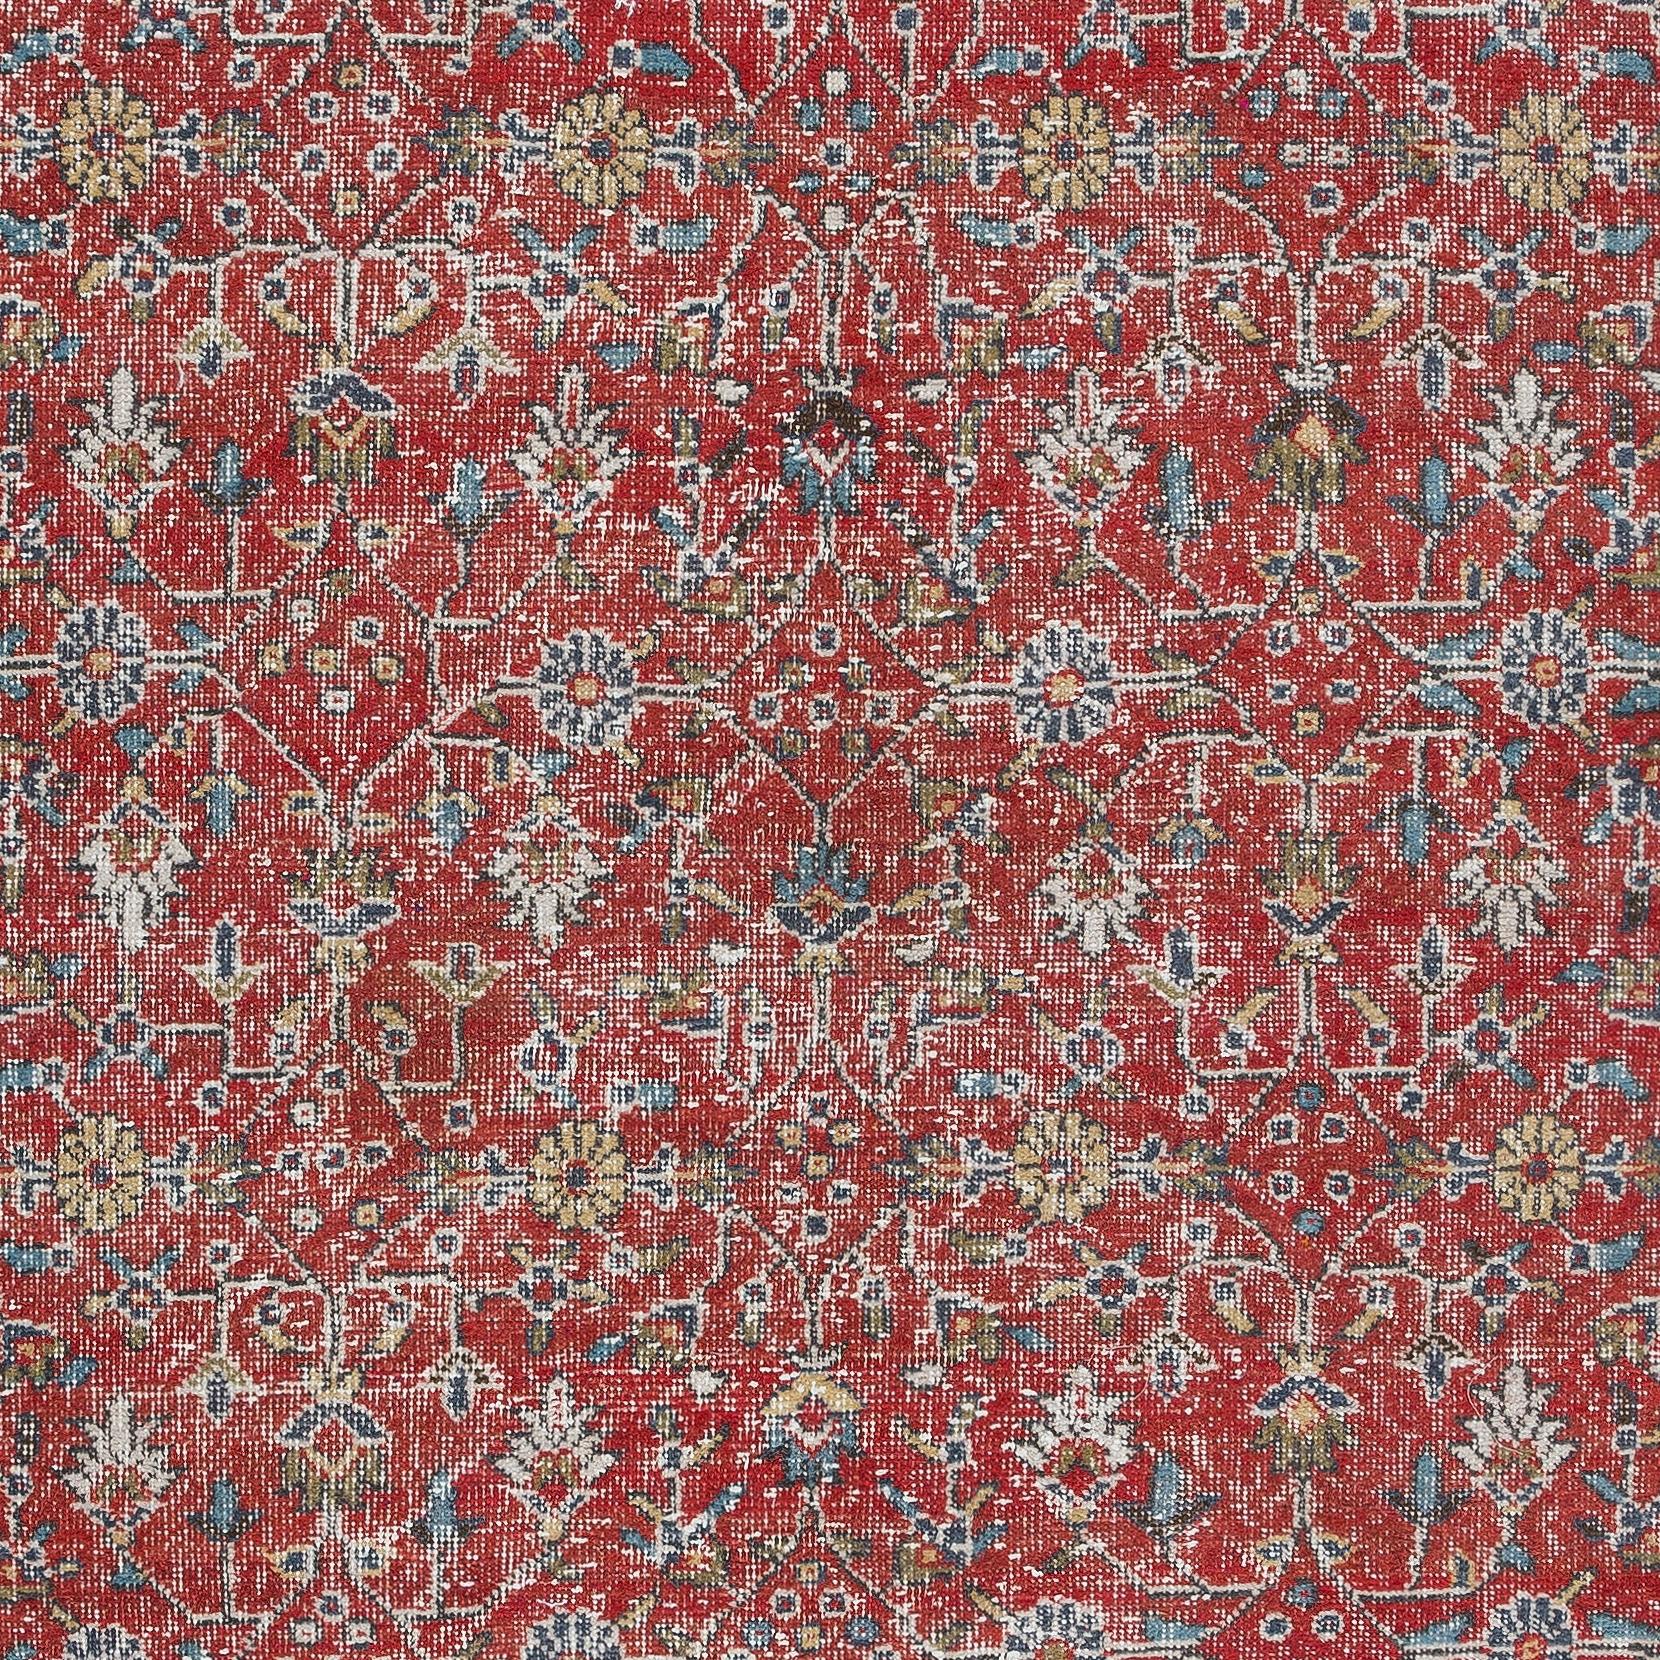 Hand-Woven 5.7x9.7 Ft Vintage Floral Hand Knotted Anatolian Wool Area Rug in Red & Beige For Sale